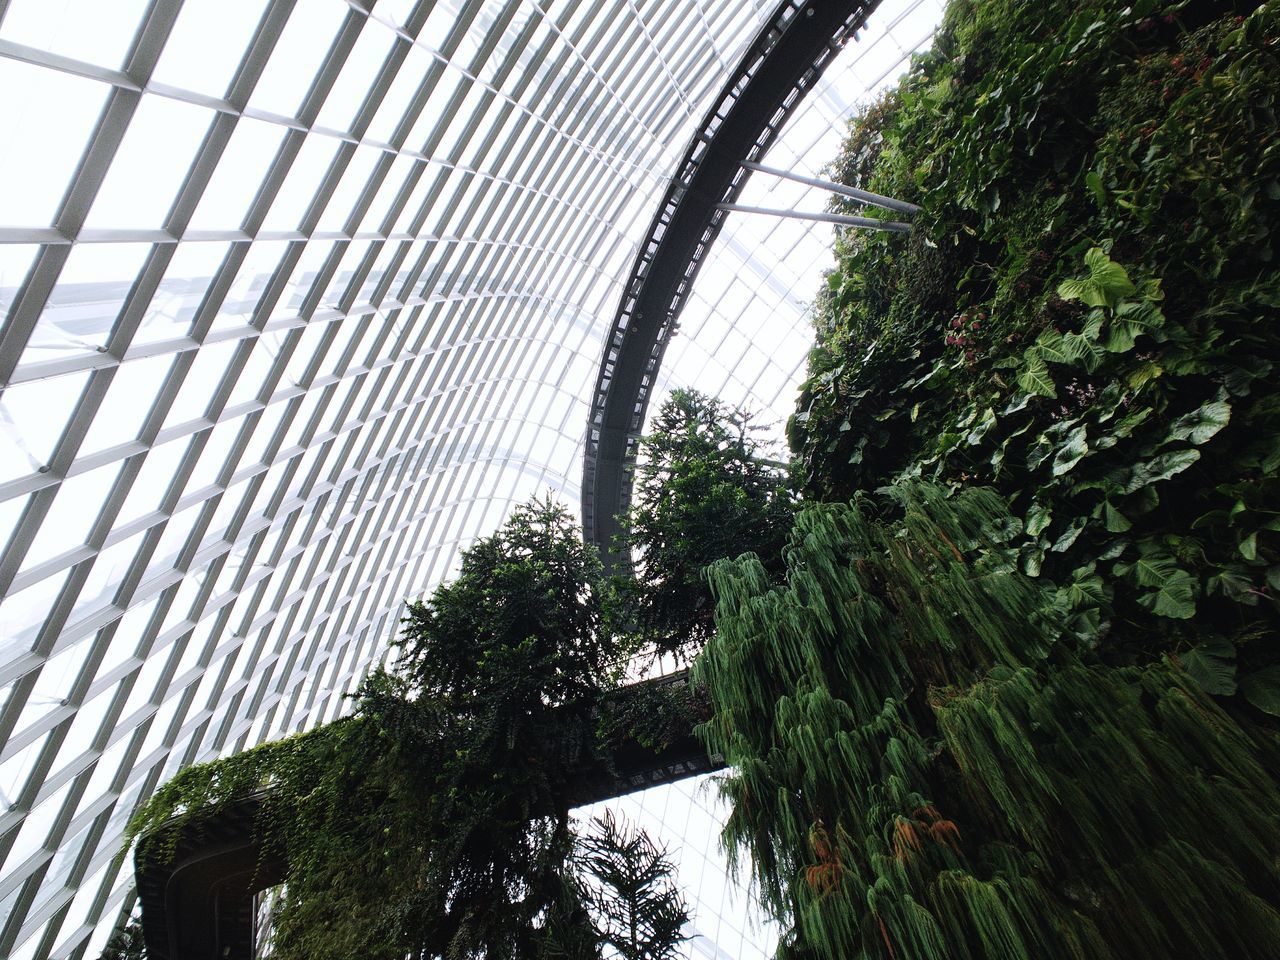 LOW ANGLE VIEW OF TREES AGAINST SKY SEEN THROUGH GREENHOUSE